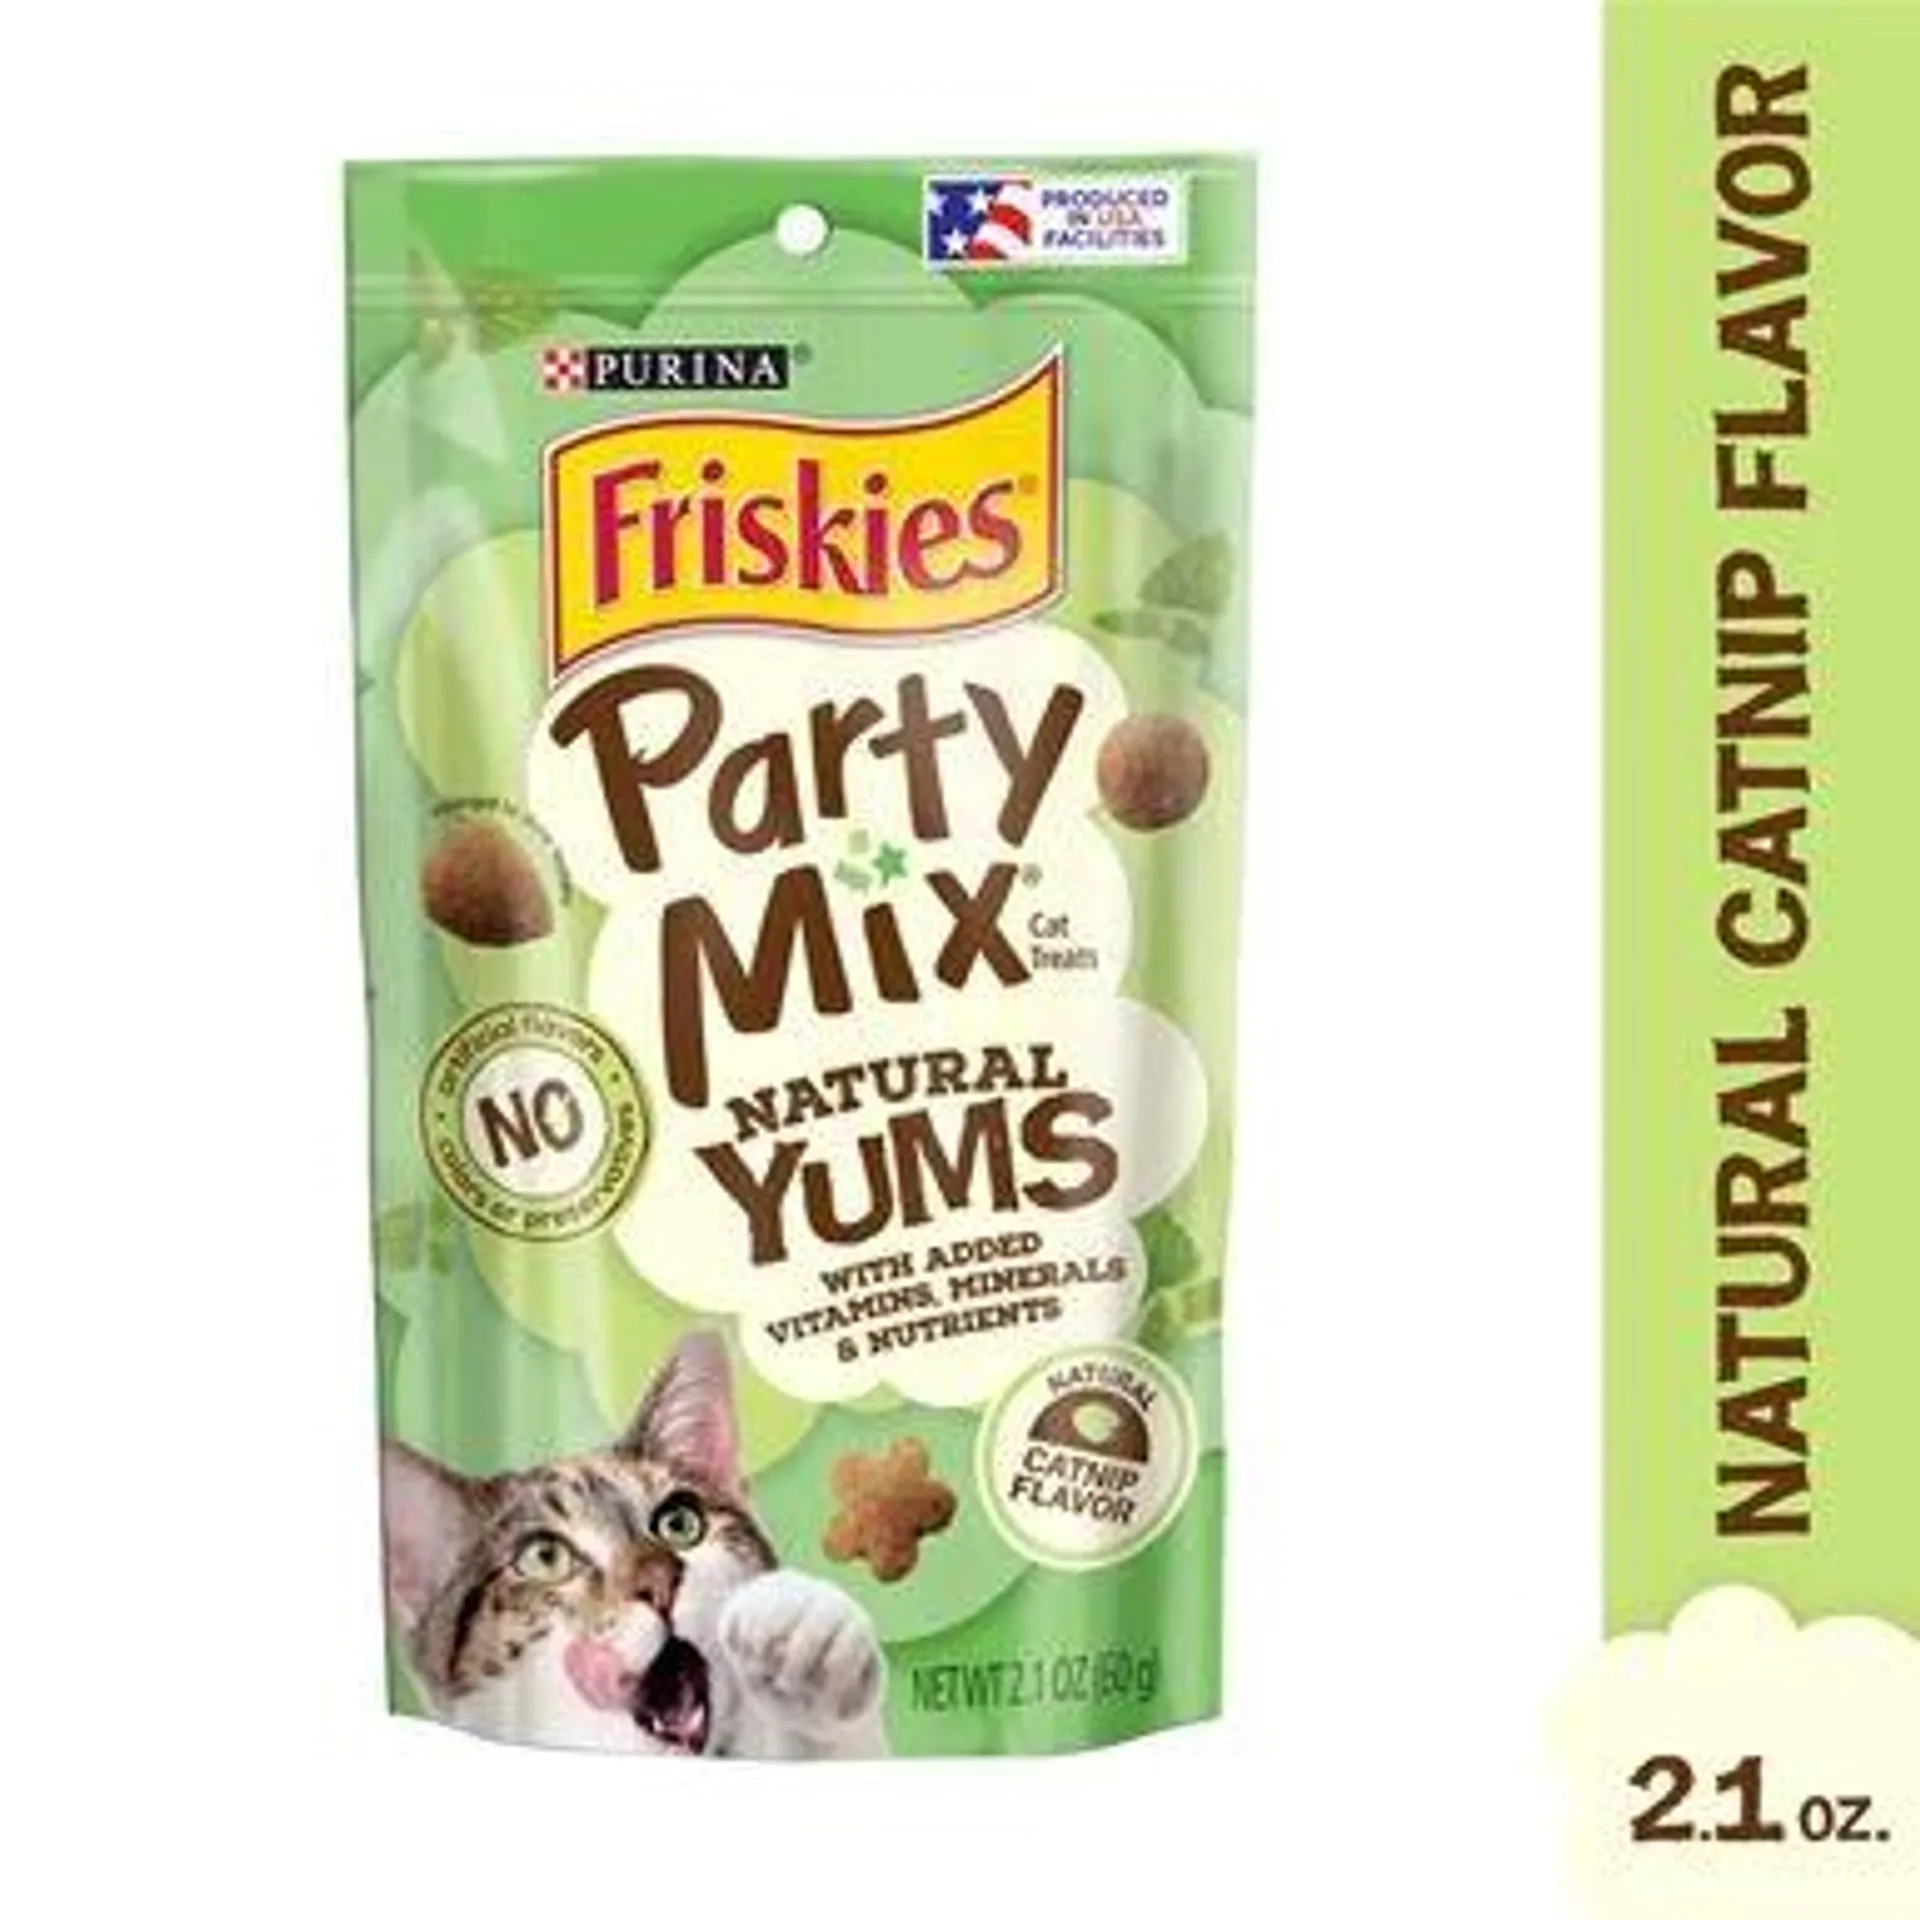 Purina Friskies , Natural Cat Treats, Party Mix Natural Yums Catnip Flavor - 2.1 Ounce Pouch